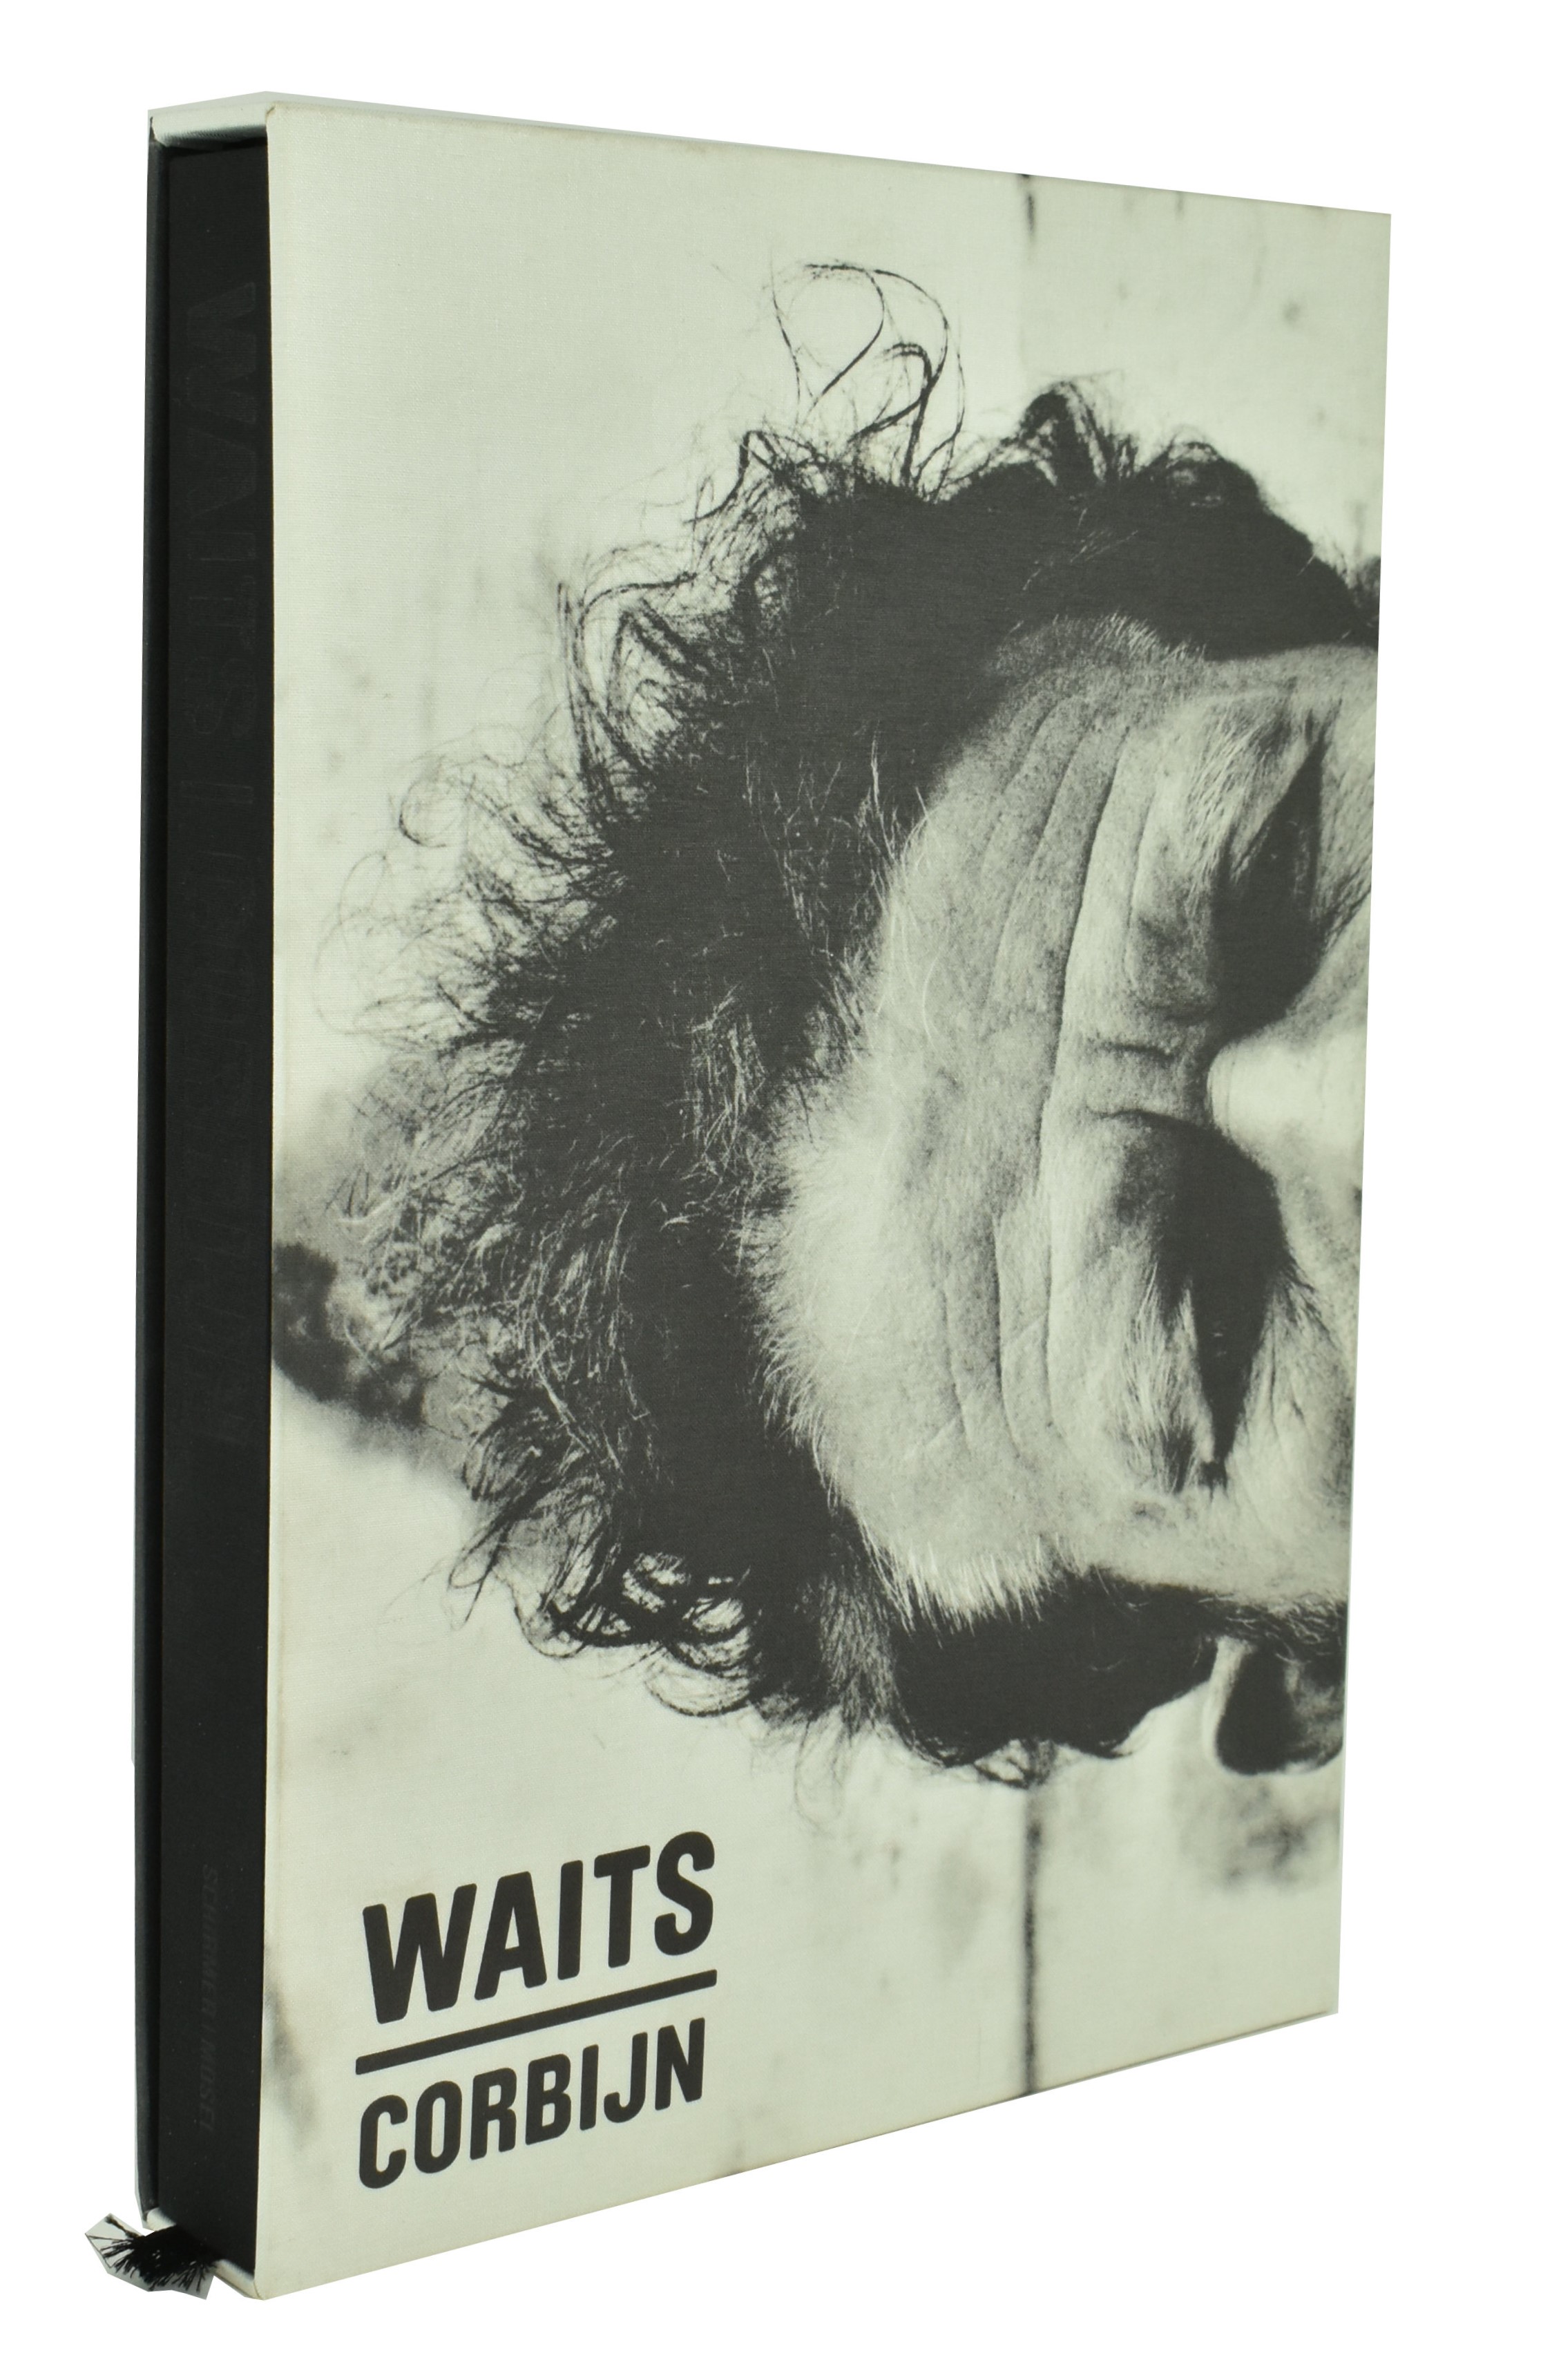 WAITS BY CORBIJN. LIMITED EDITION ON TOM WAITS IN SLIPCASE